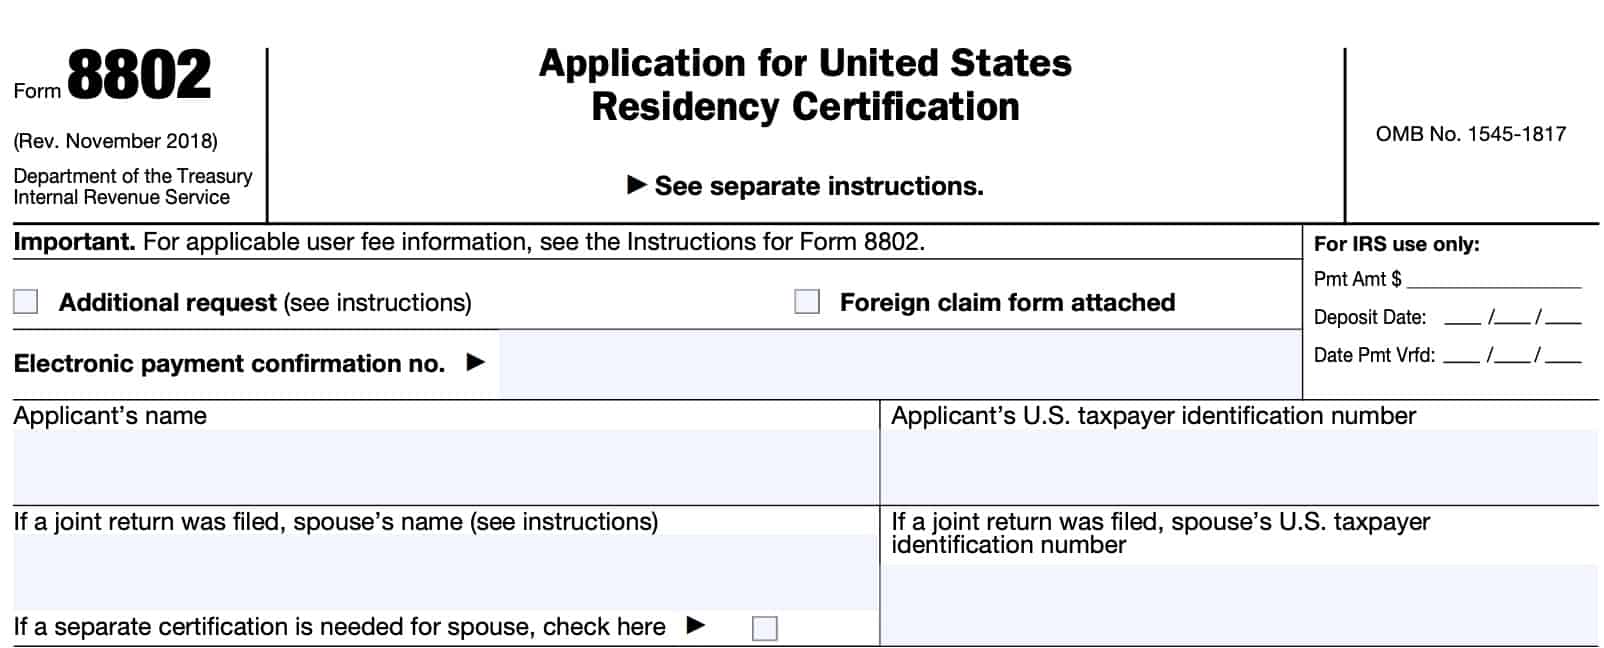 The top of irs form 8802, application for u.s. residency certification, contains taxpayer information